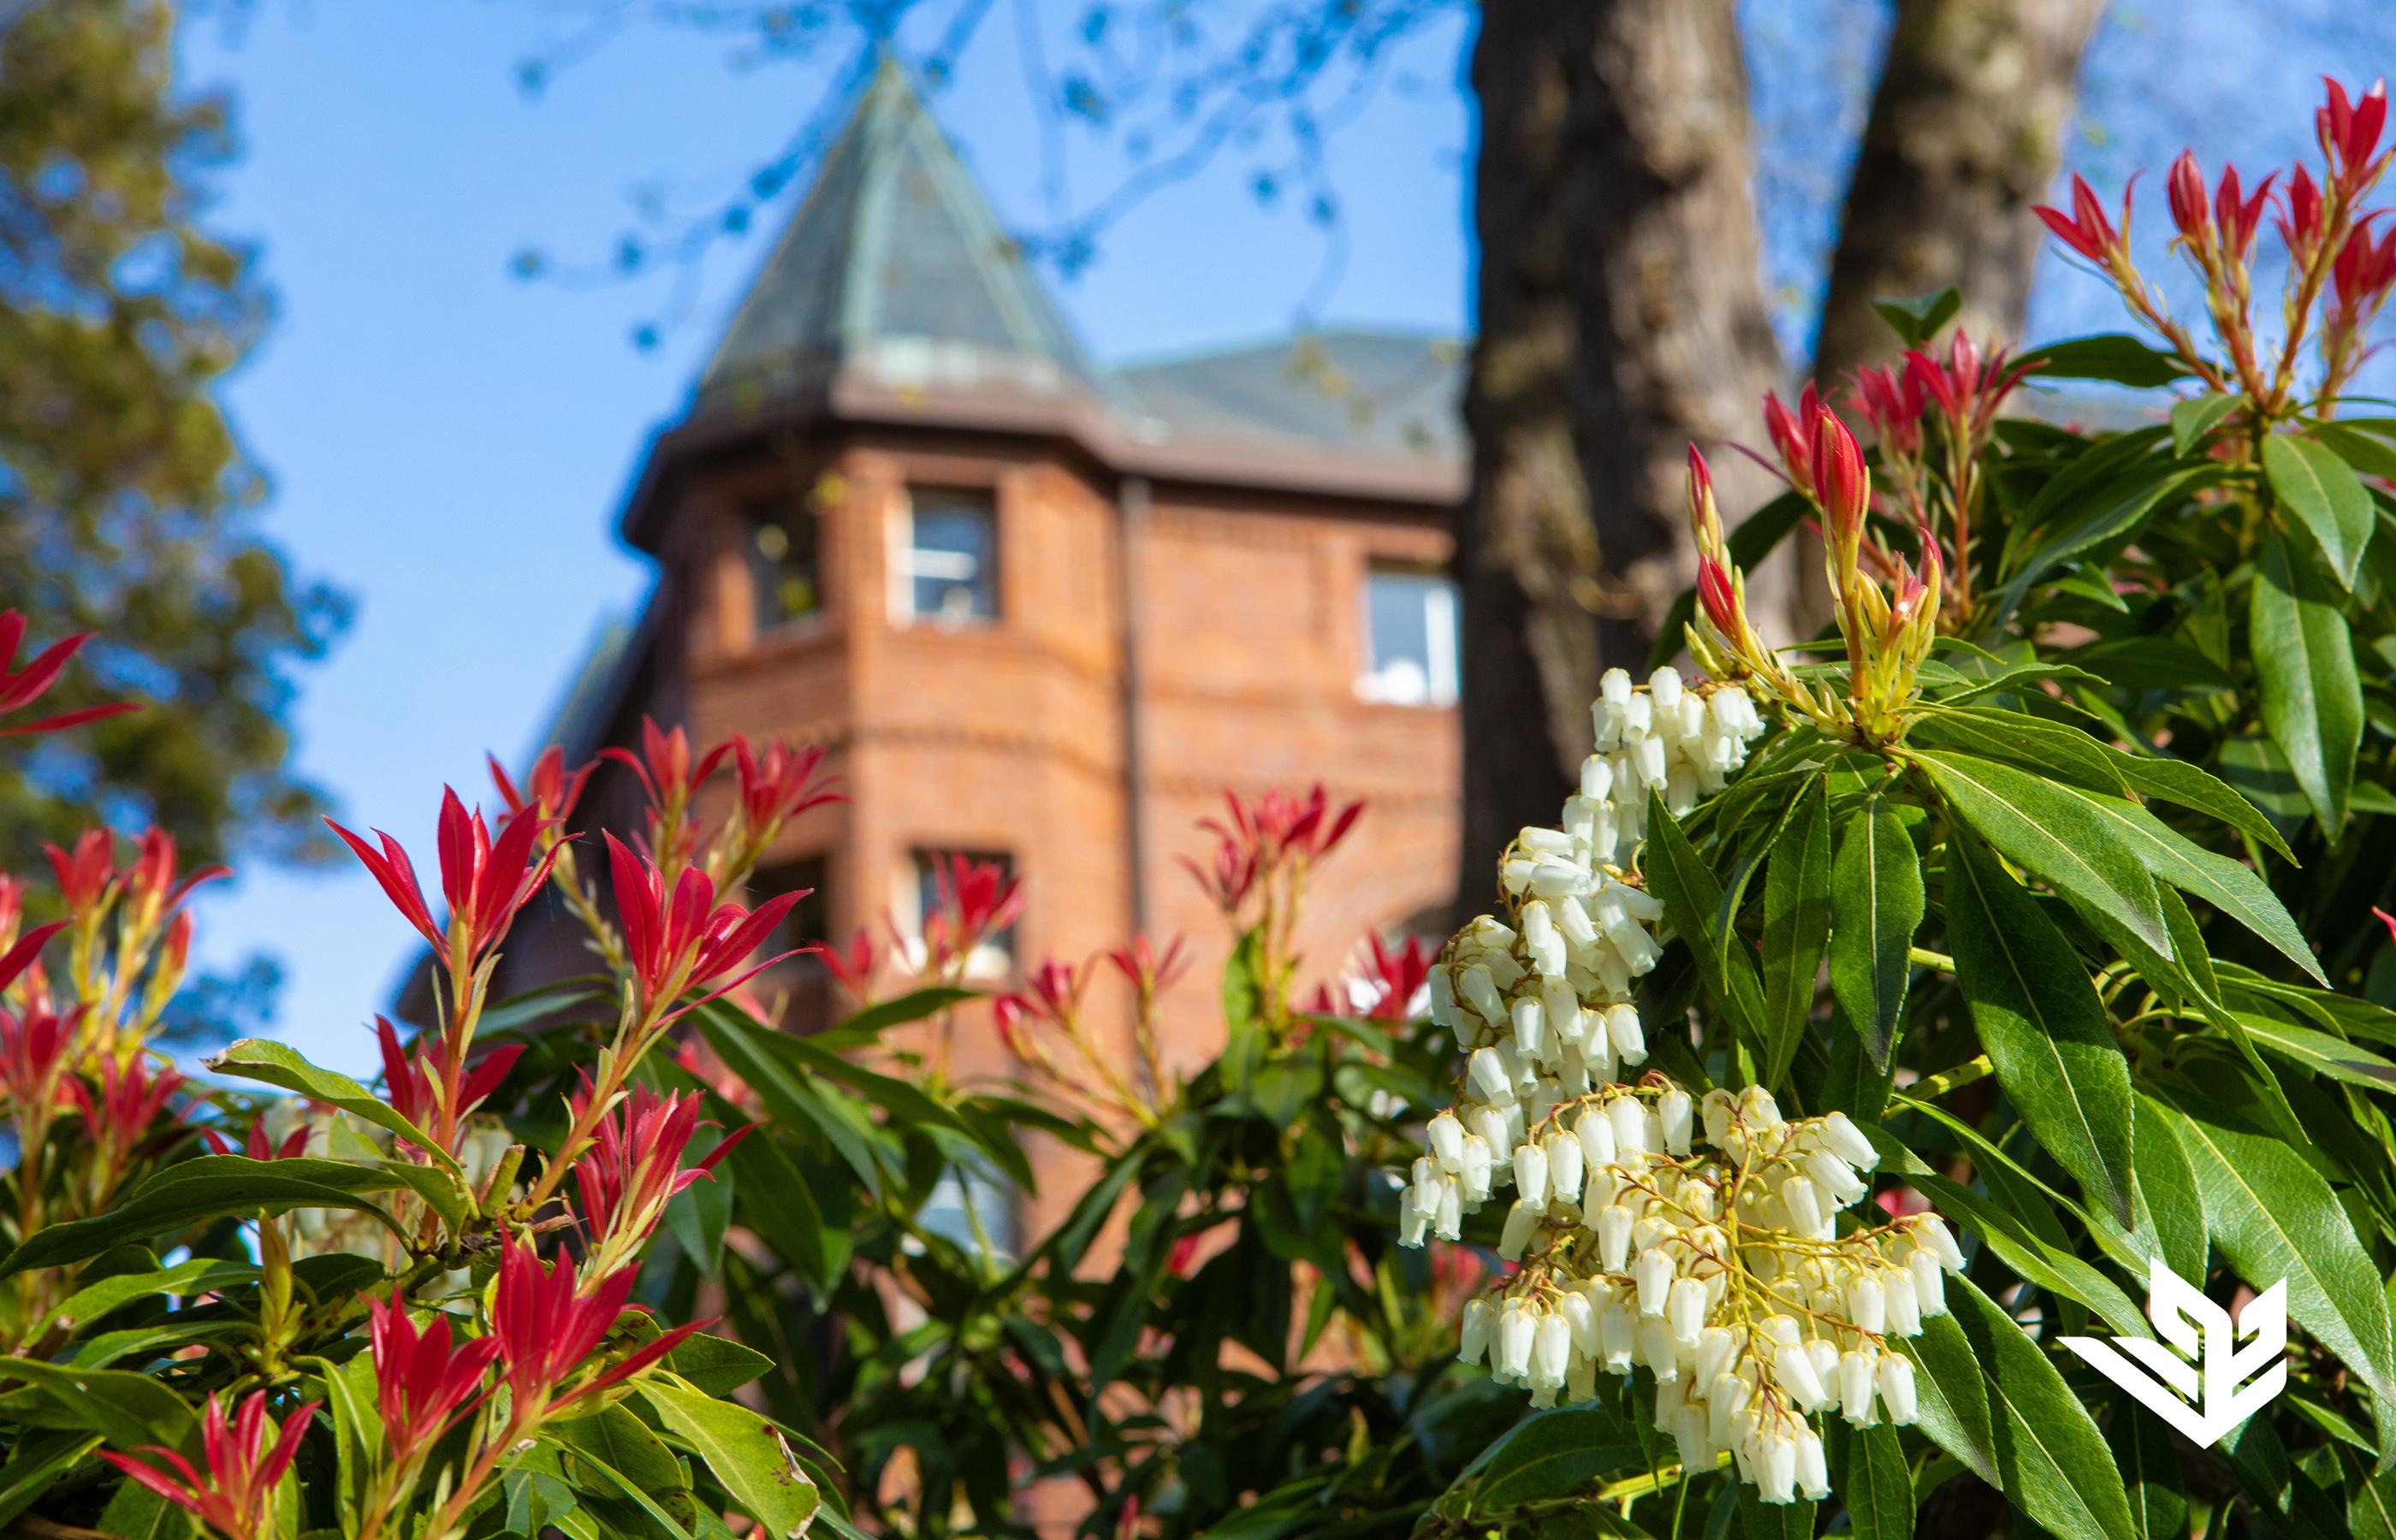 A campus image with summer foliage in the foreground and historic Alexander and Adelaide Hall in the background at Seattle Pacific University